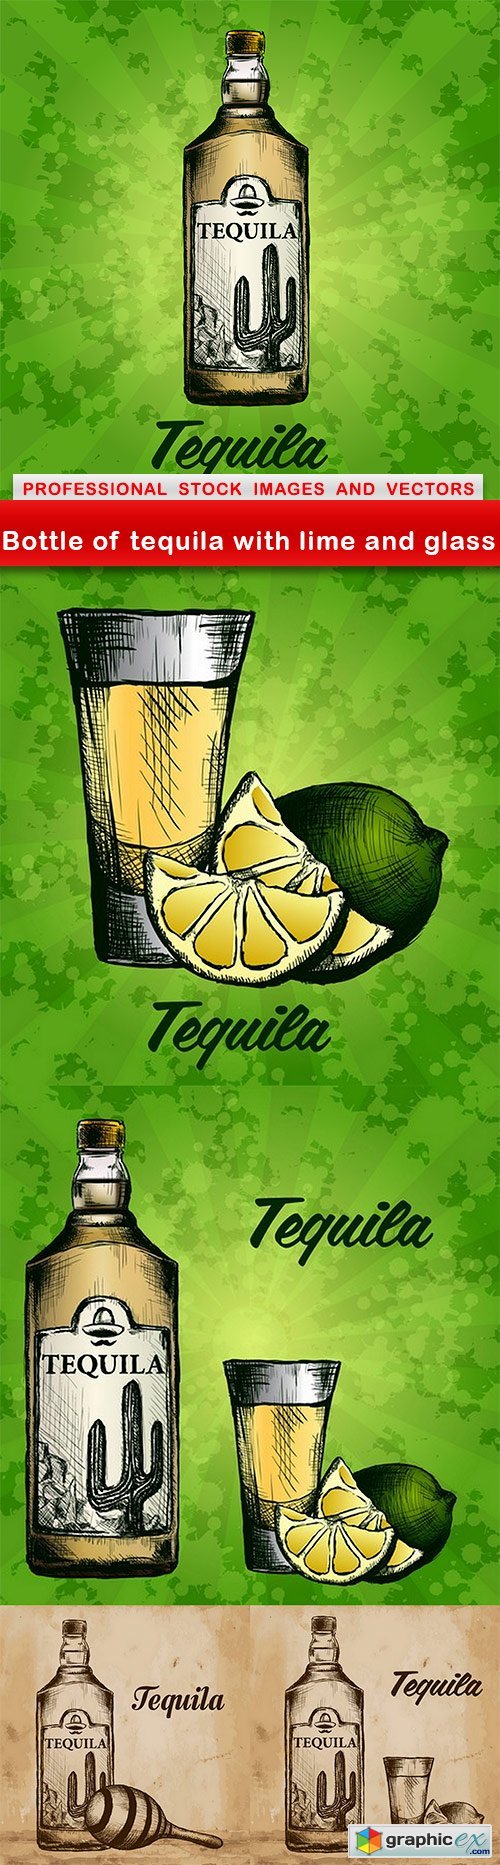 Bottle of tequila with lime and glass - 5 EPS